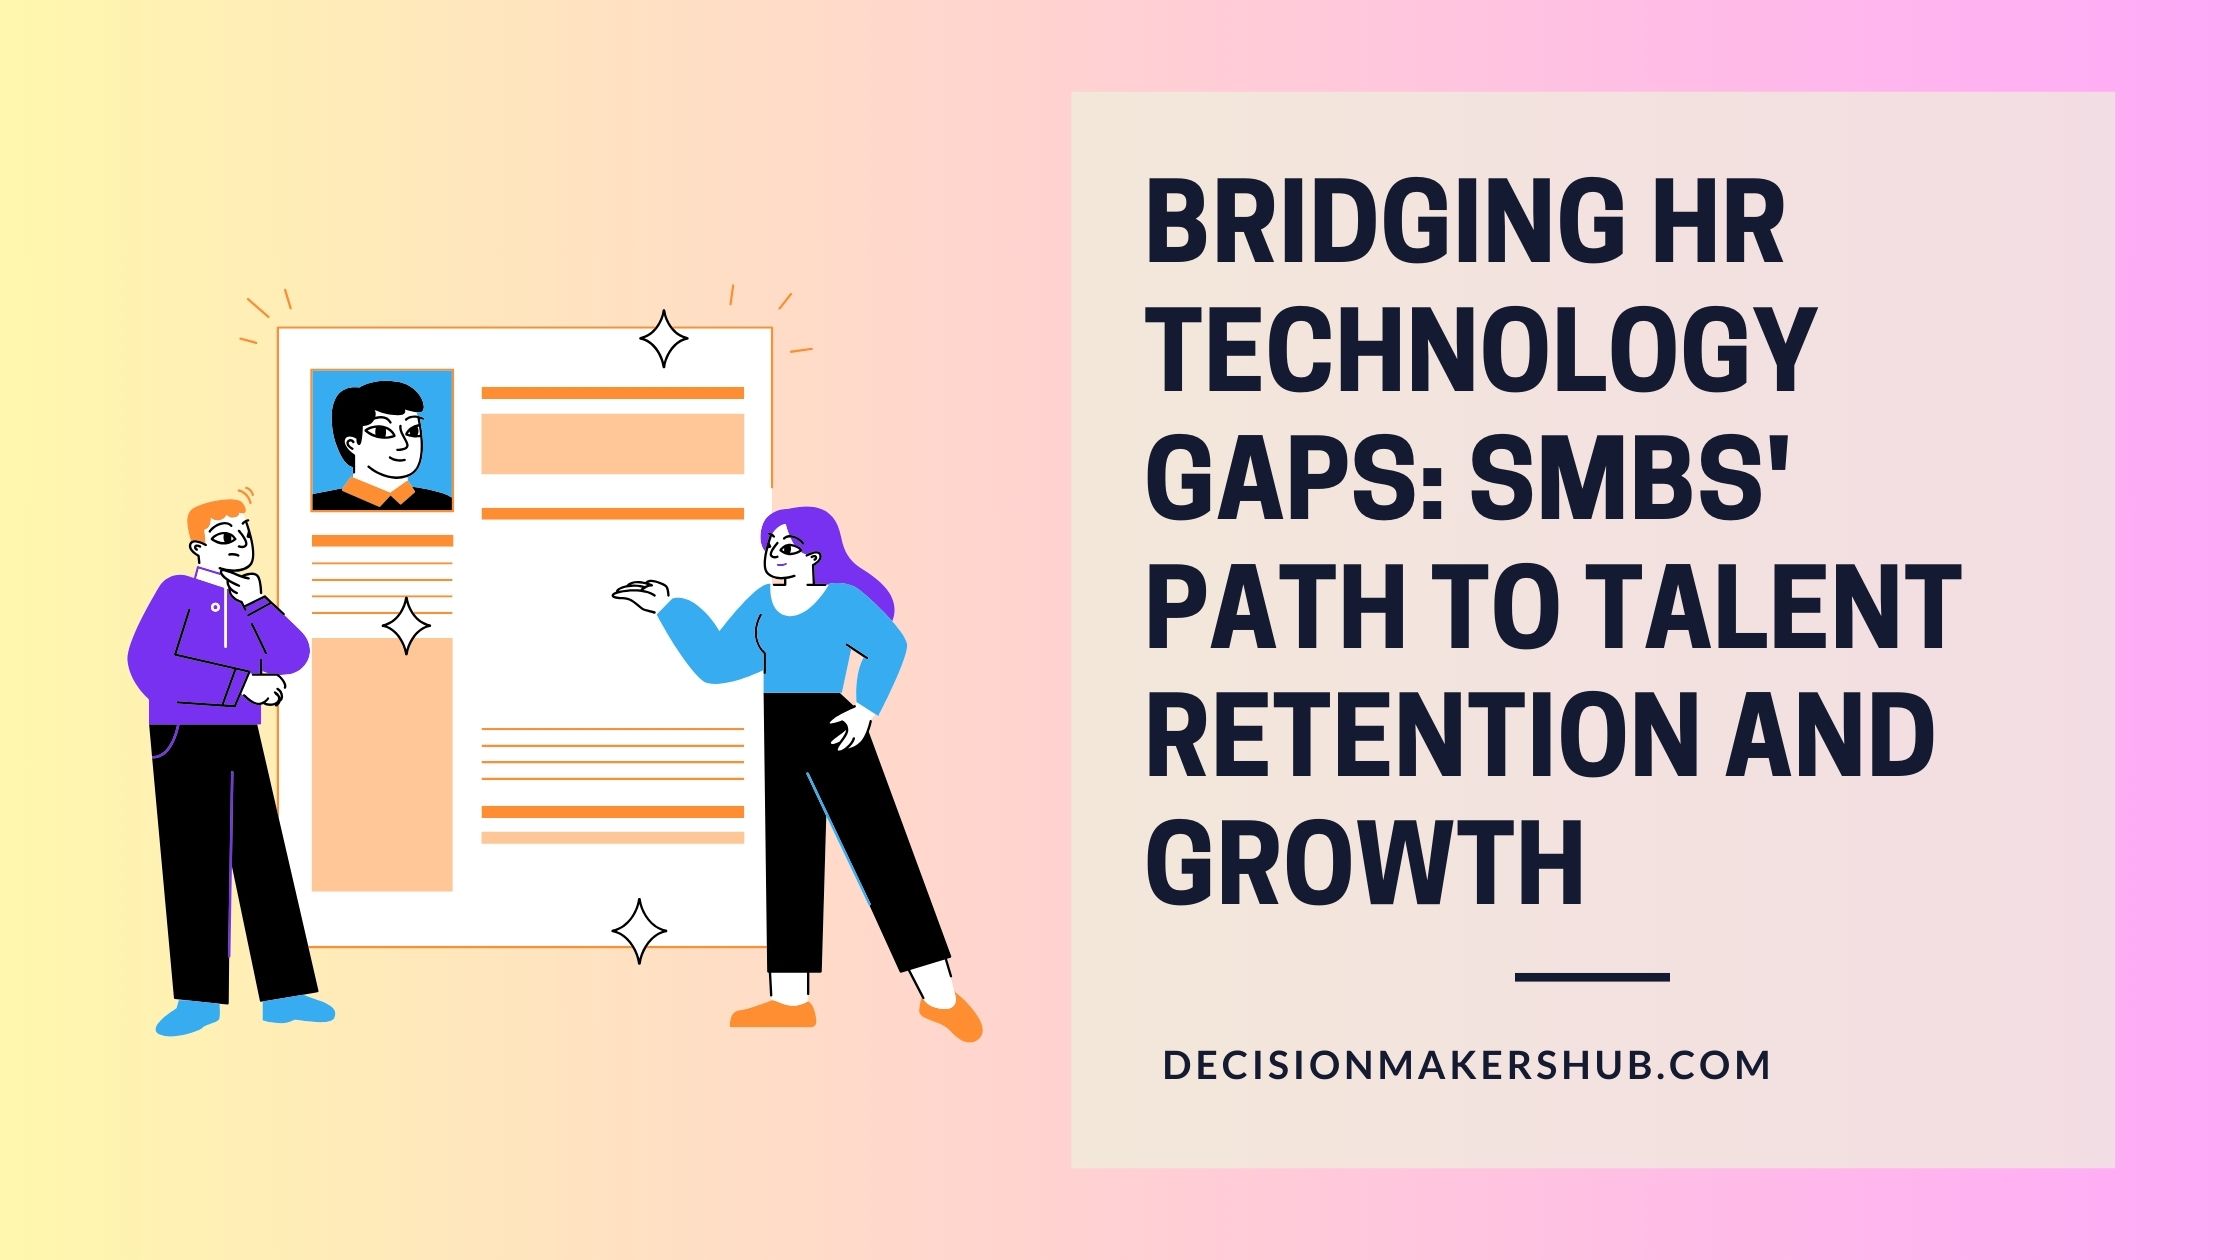 Bridging HR Technology Gaps: SMBs’ Path to Talent Retention and Growth